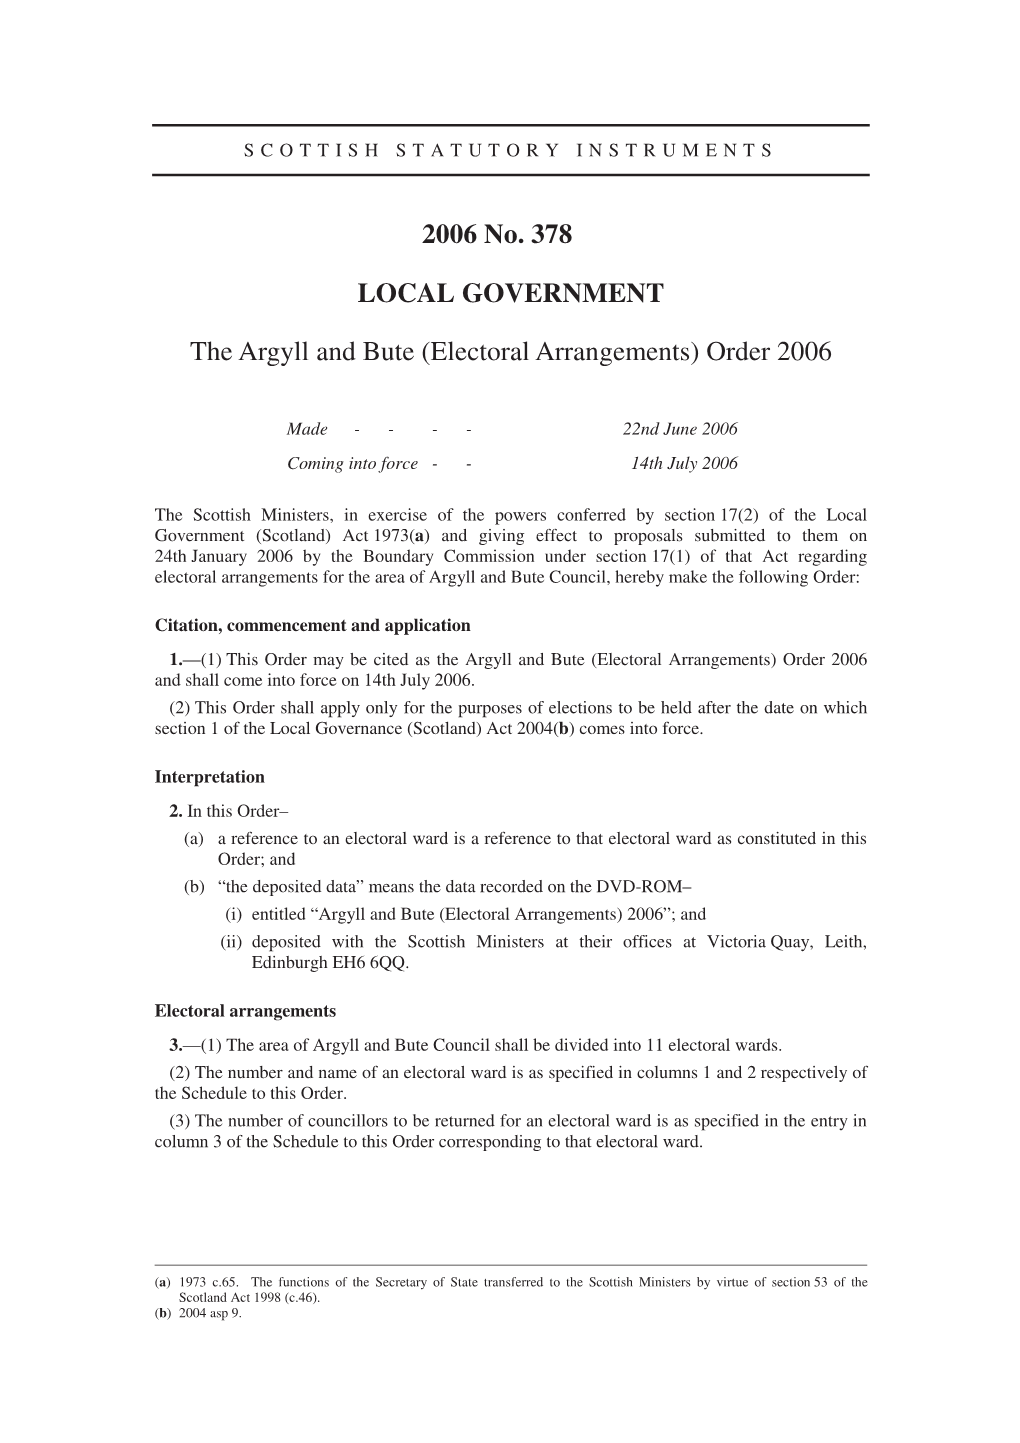 2006 No. 378 LOCAL GOVERNMENT the Argyll And